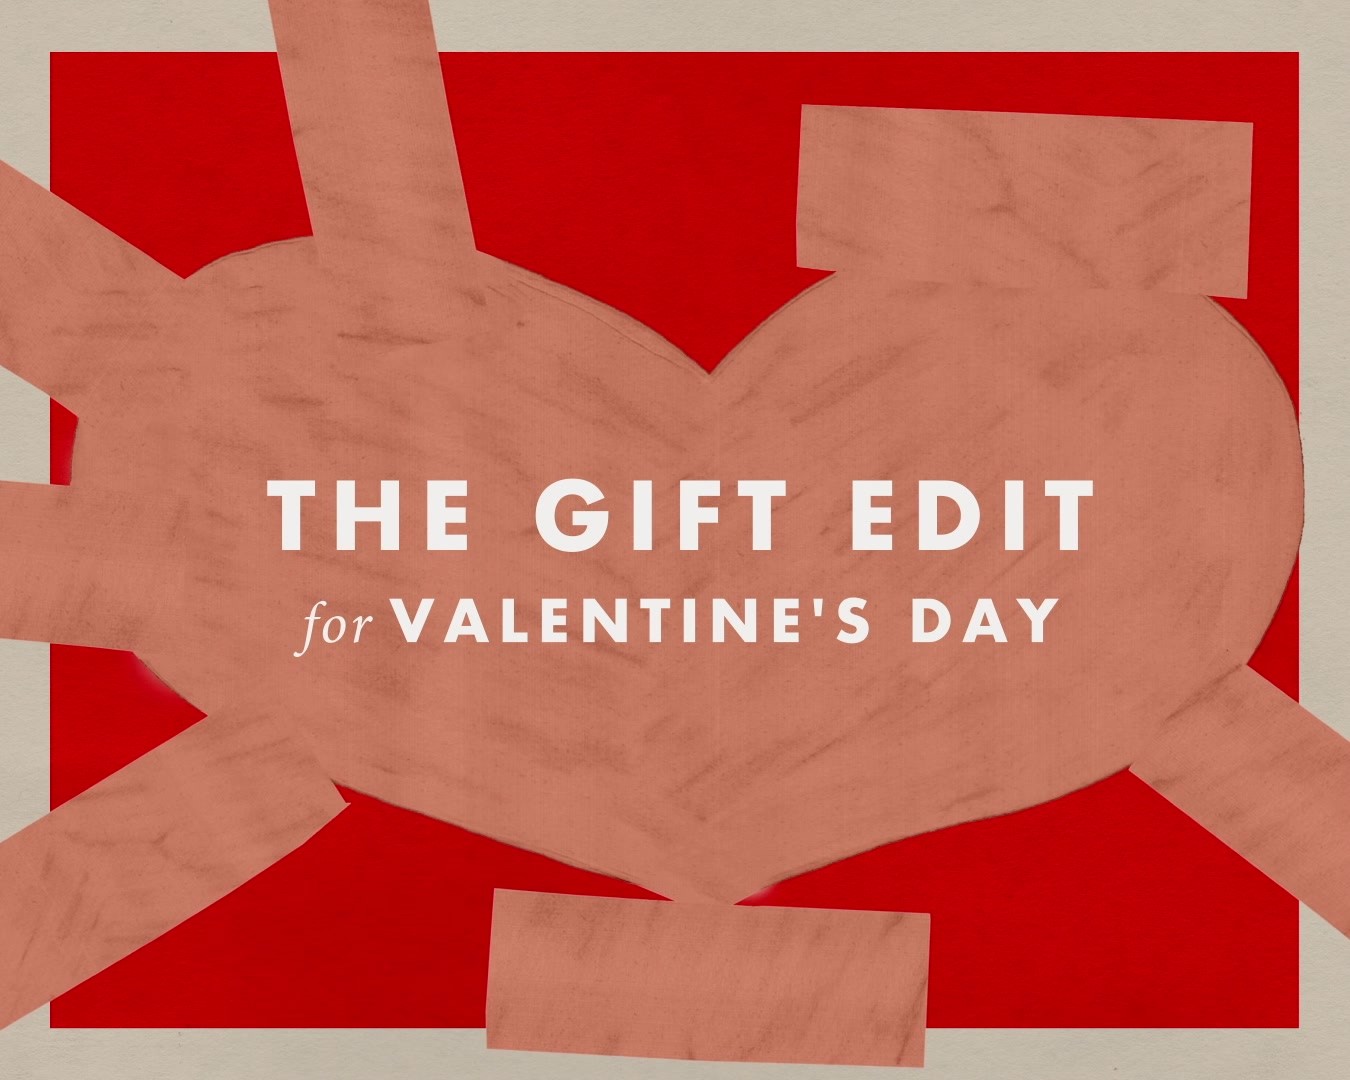 Today’s the last day to order online and receive your gifts in time for Valentine’s! Need a little inspiration? 